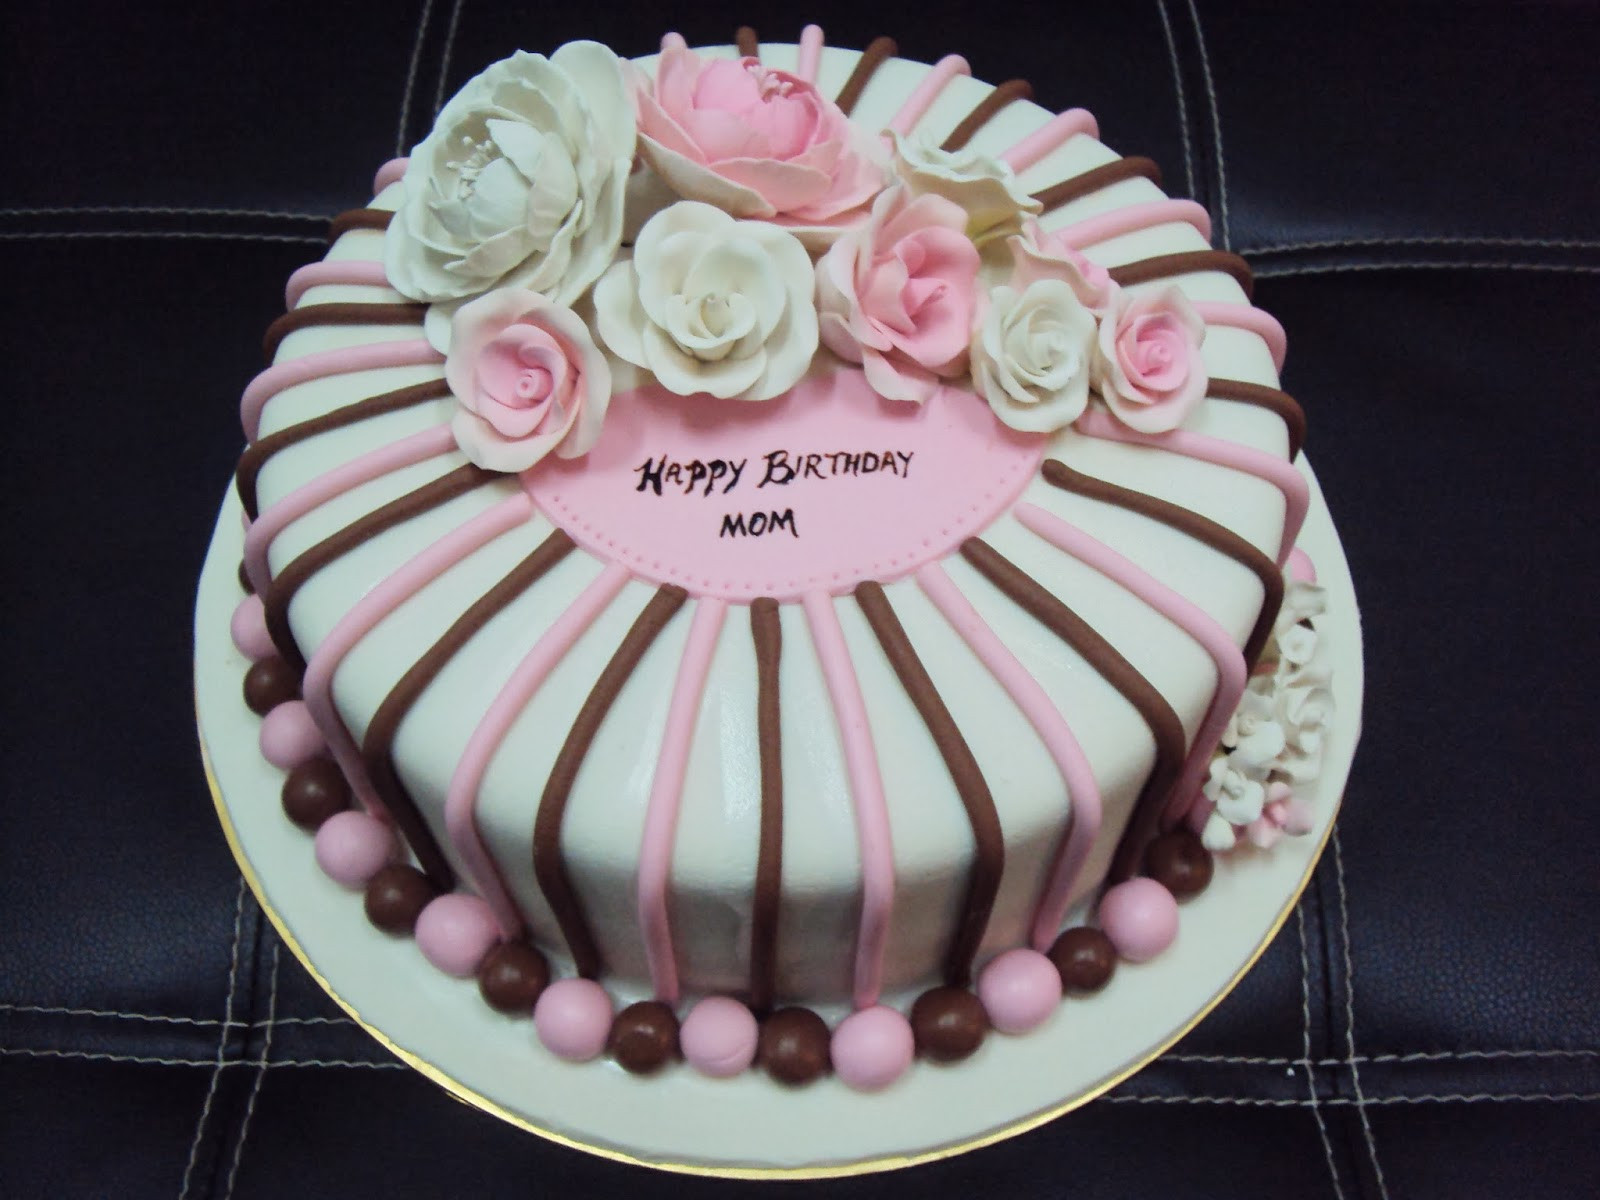 Birthday Cake Ideas For Mom
 L mis Cakes & Cupcakes Ipoh Contact 012